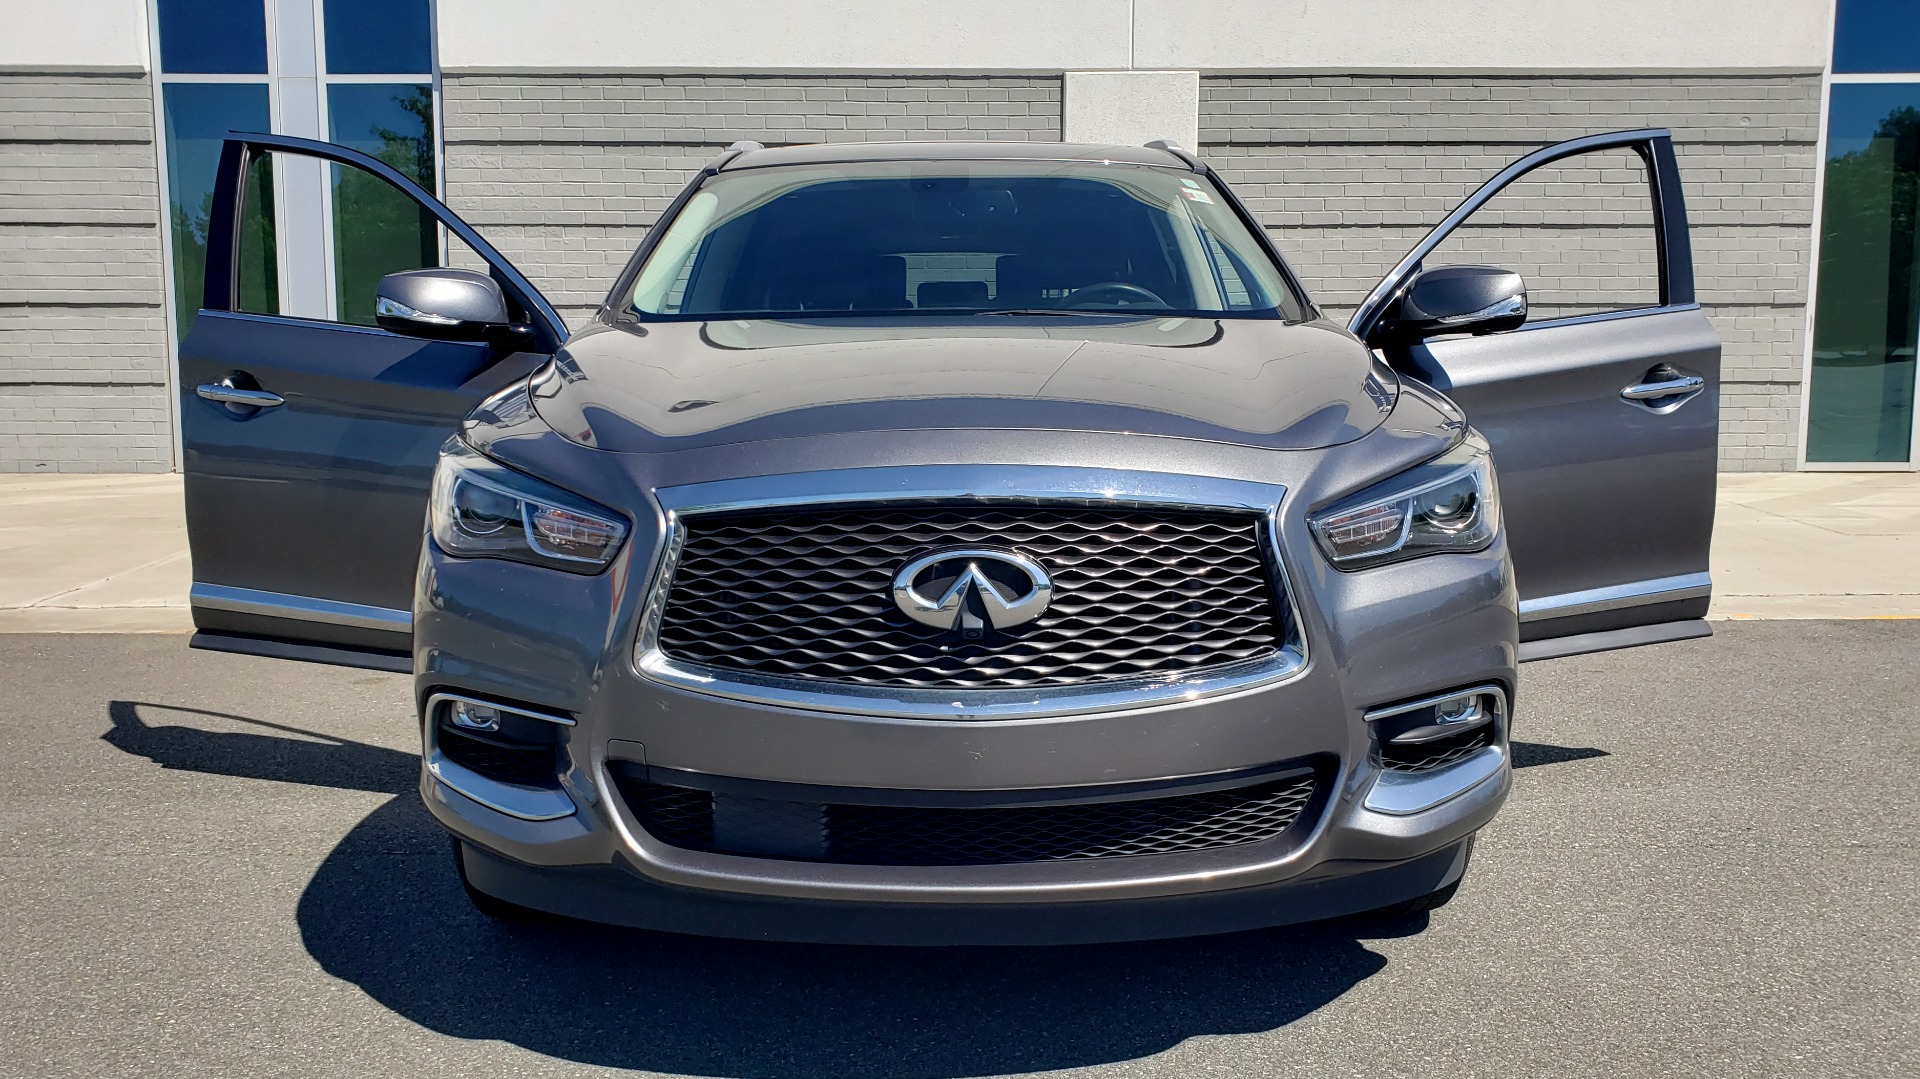 Used 2018 INFINITI QX60 3.5L V6 / FWD / CVT TRANS / NAV / SUNROOF / 3-ROWS / REARVIEW for sale Sold at Formula Imports in Charlotte NC 28227 26